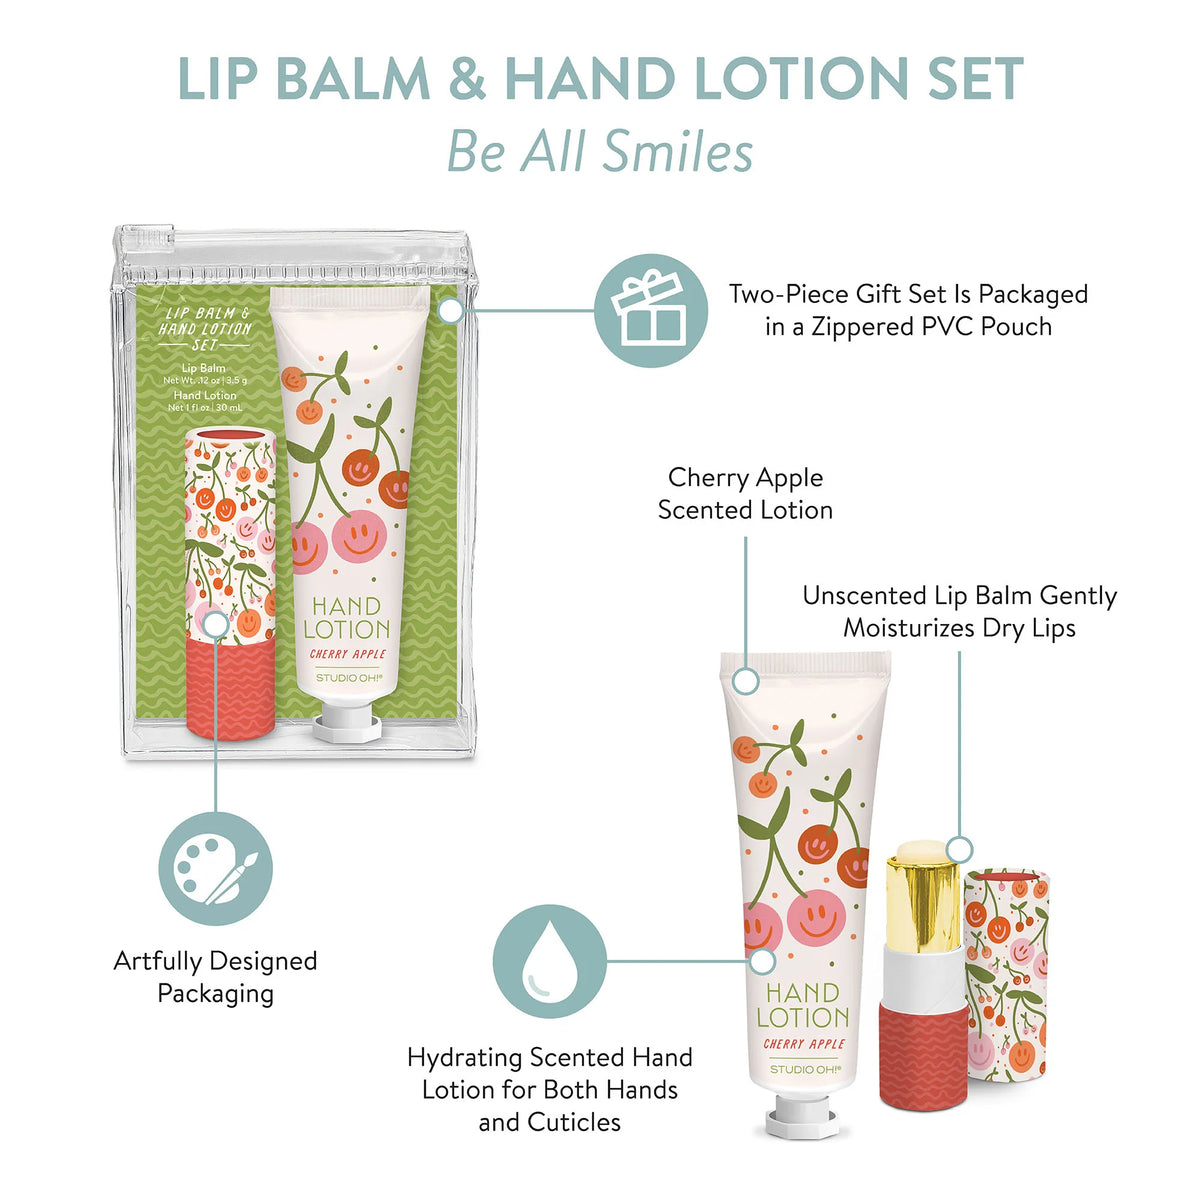 Be All Smiles Lip Balm & Hand Lotion Set Cover